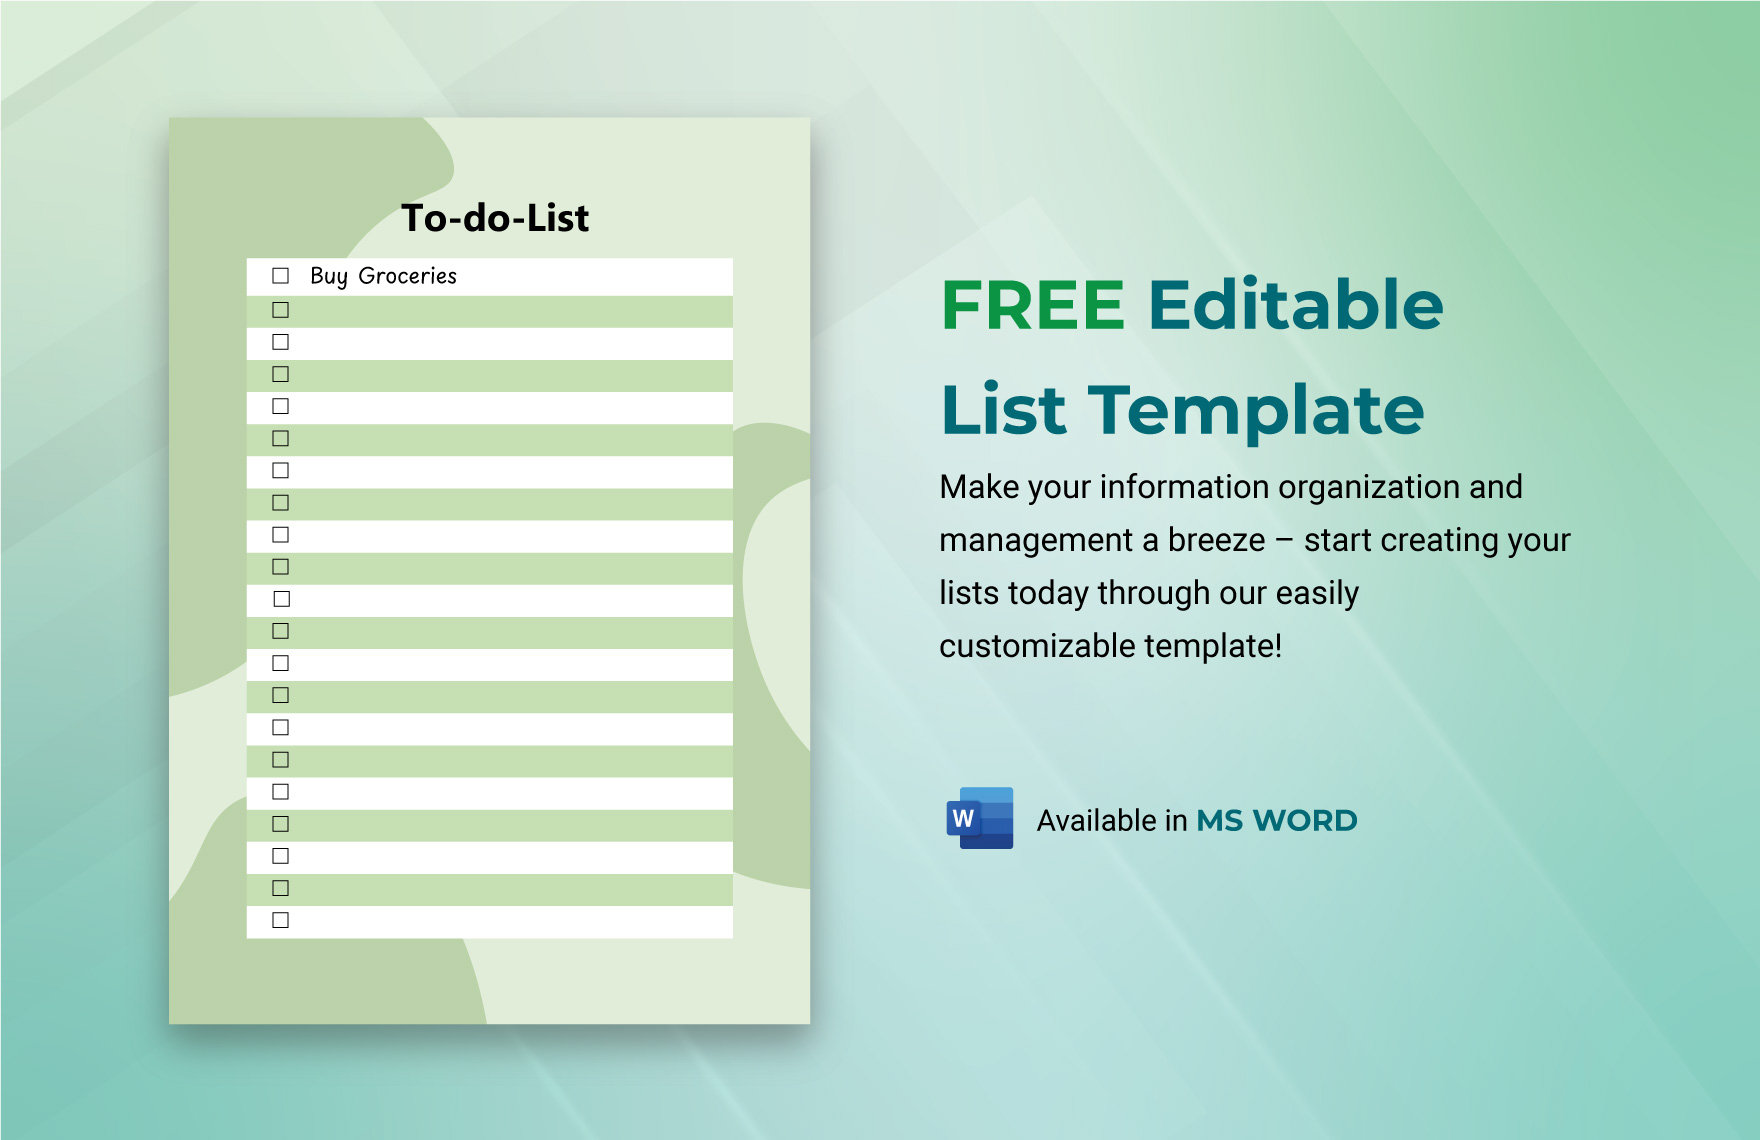 Free tier list templates you can customize